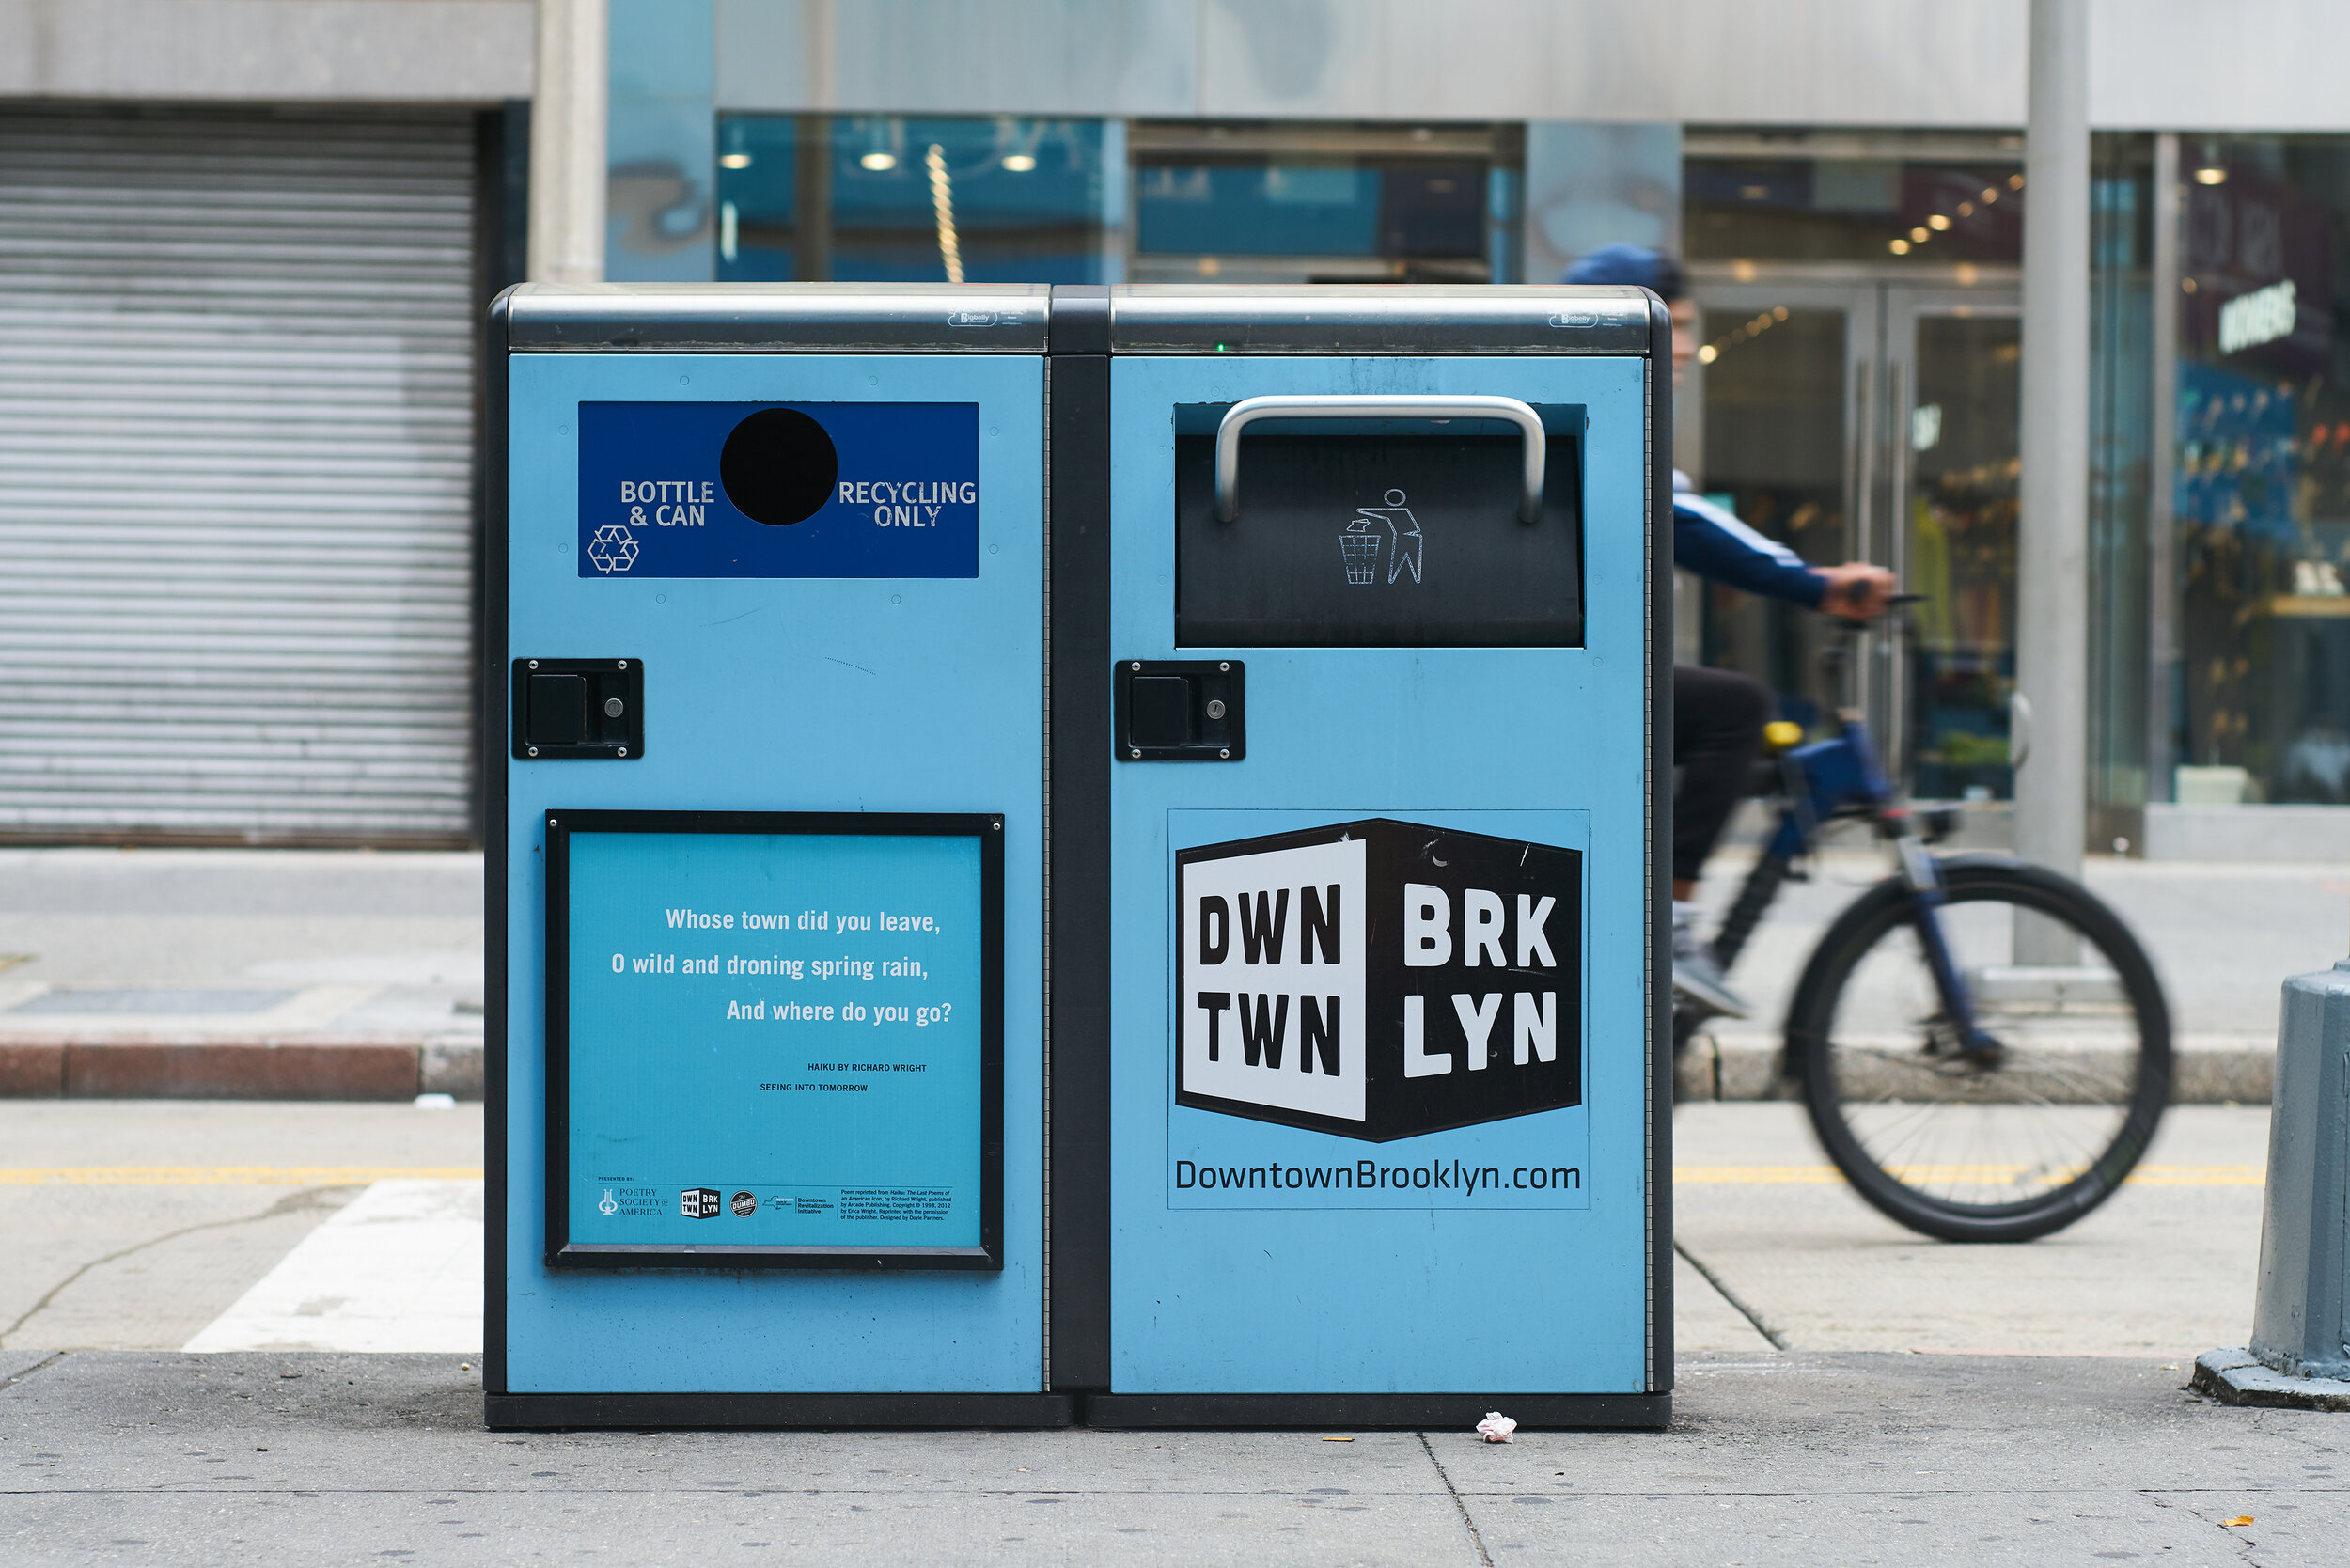  One of the Big Belly recycling bins on Fulton Mall   JACOB POLCYN-EVANS  